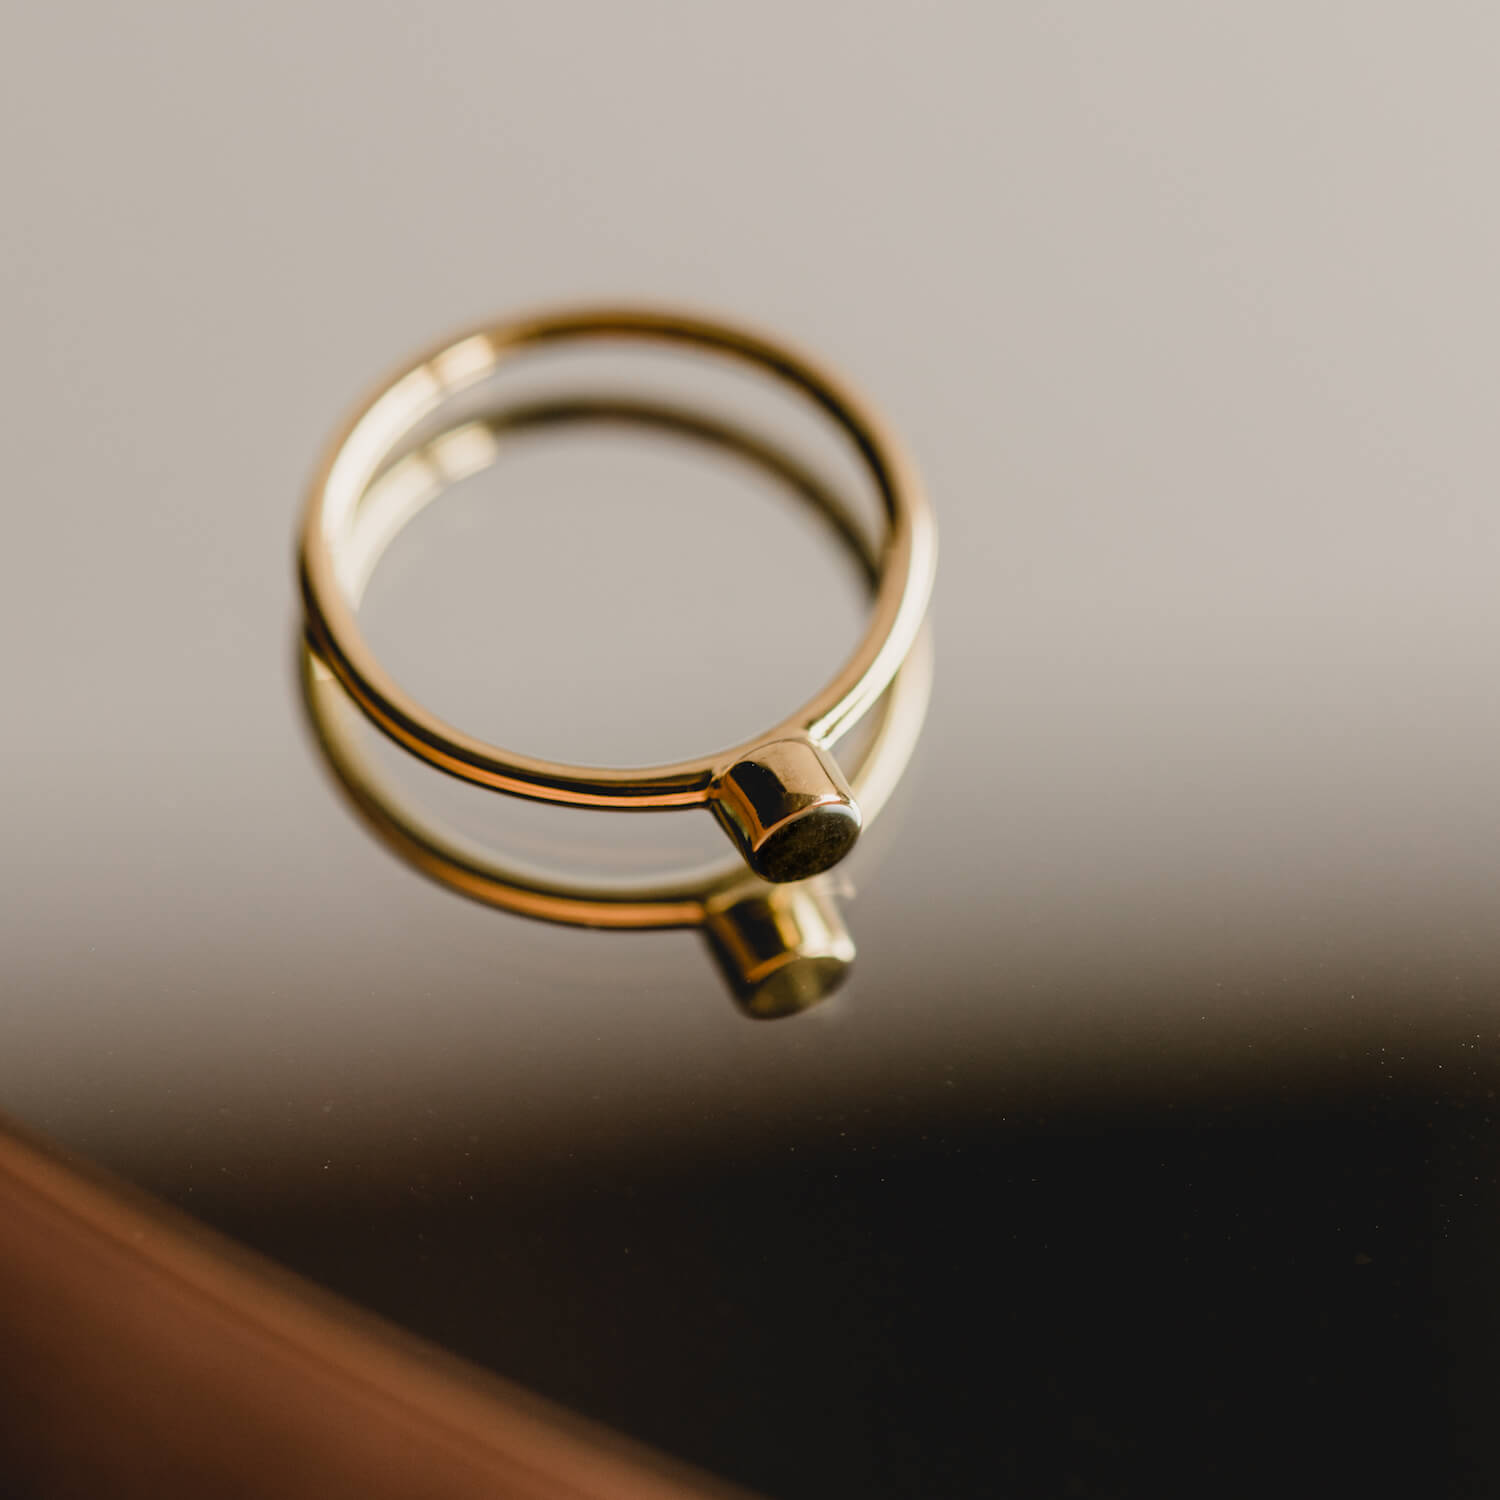 Dark and shadowy image of a gold Matthew calvin dot ring on a mirror